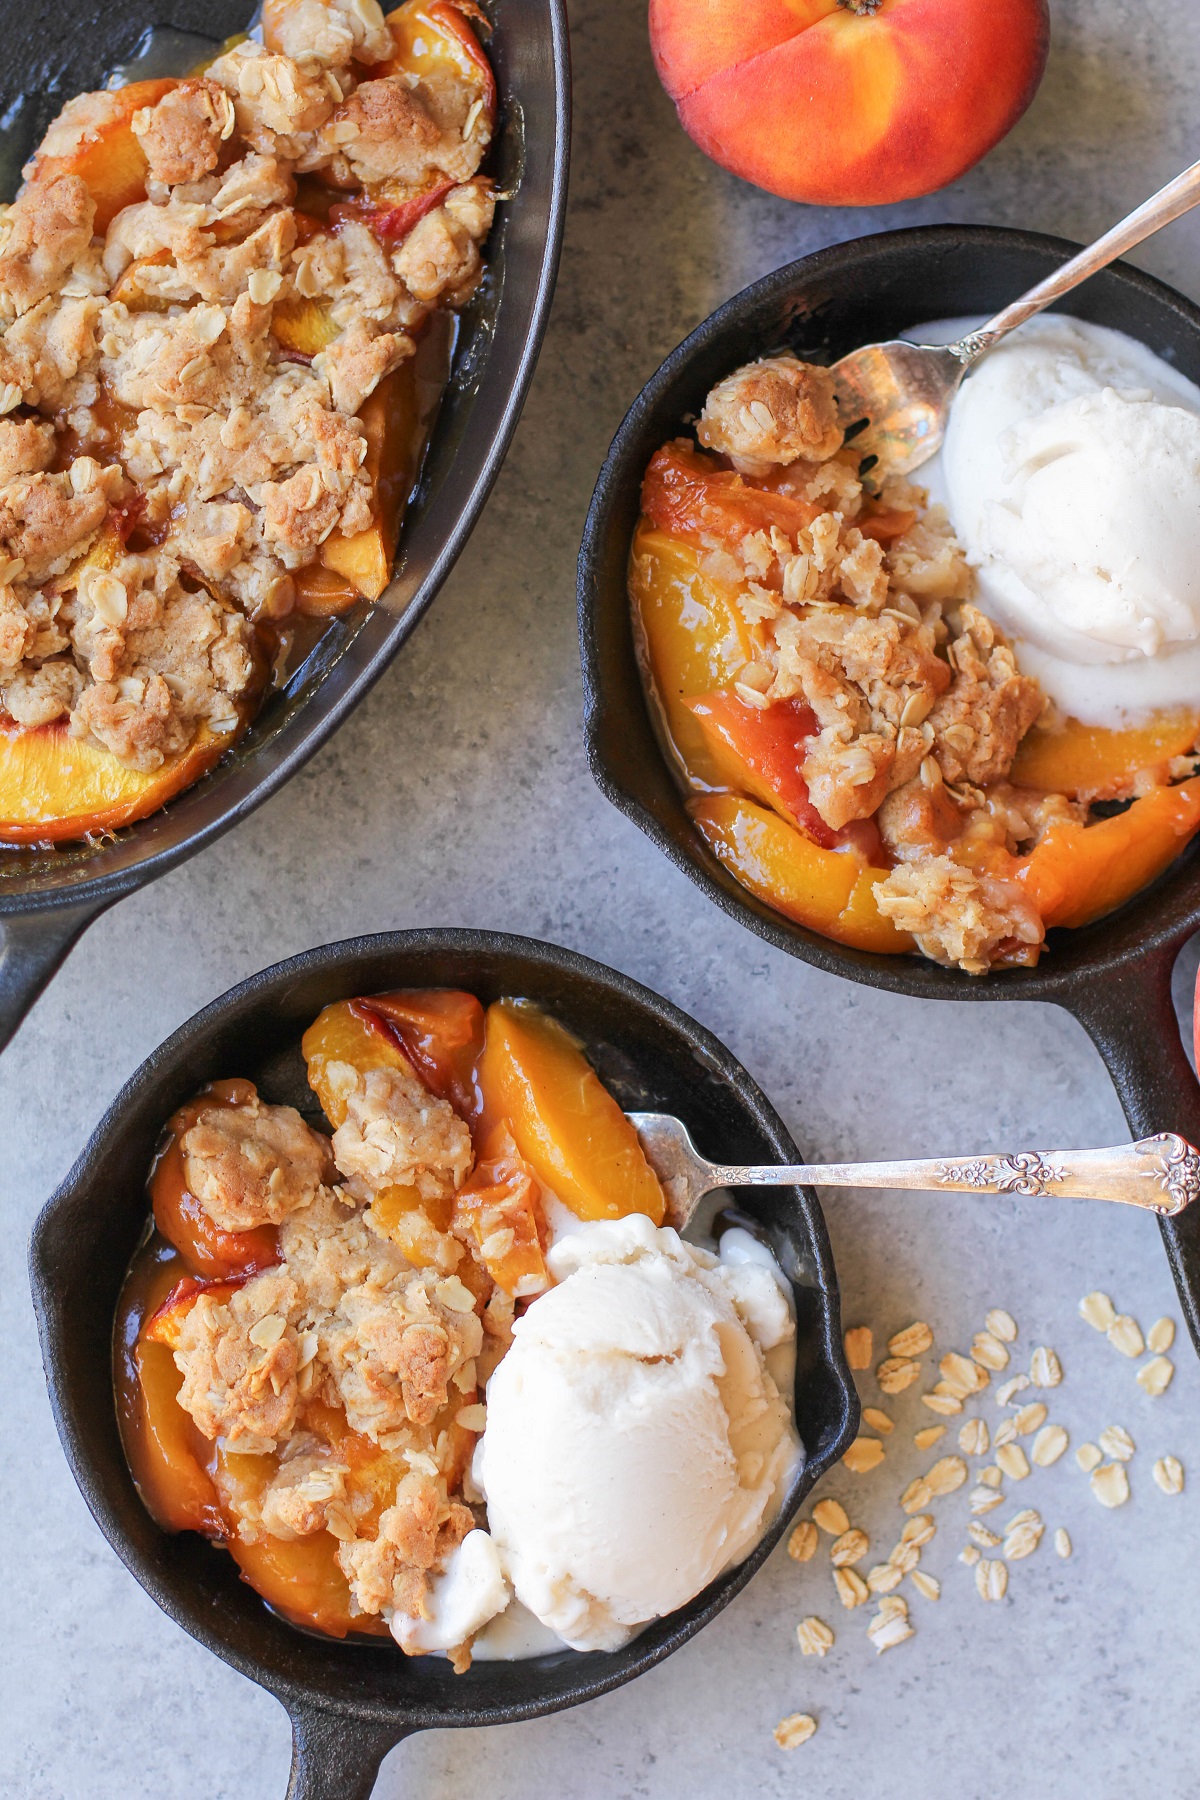 Gluten-Free Vegan Peach Crisp in two small cast iron skillets with scoops of vanilla ice cream, ready to eat.